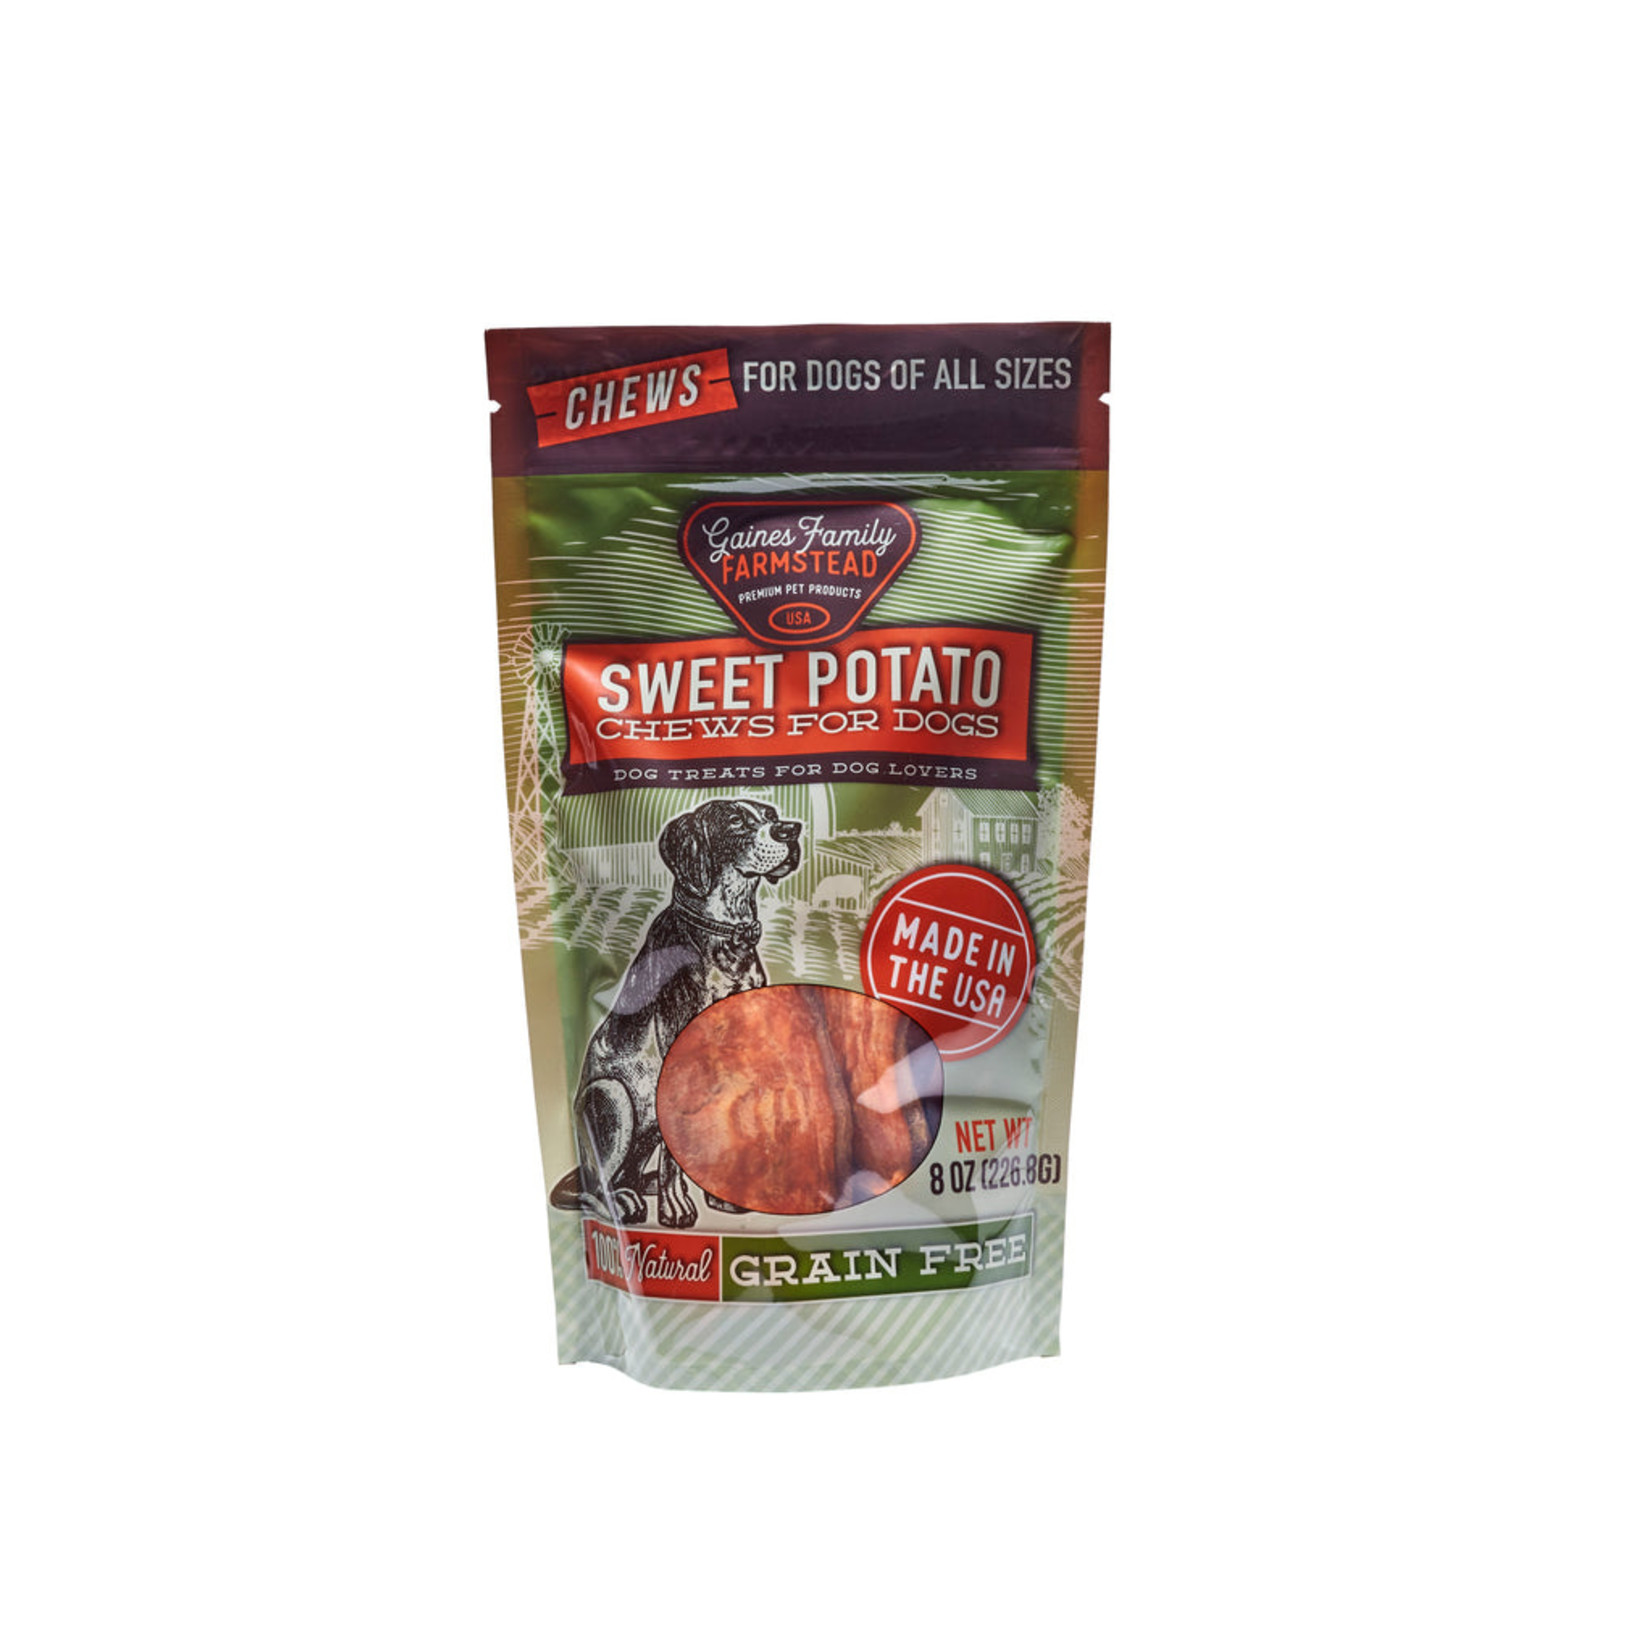 Gaines Family Gaines Family Farmstead Sweet Potato Slices Dog Chew